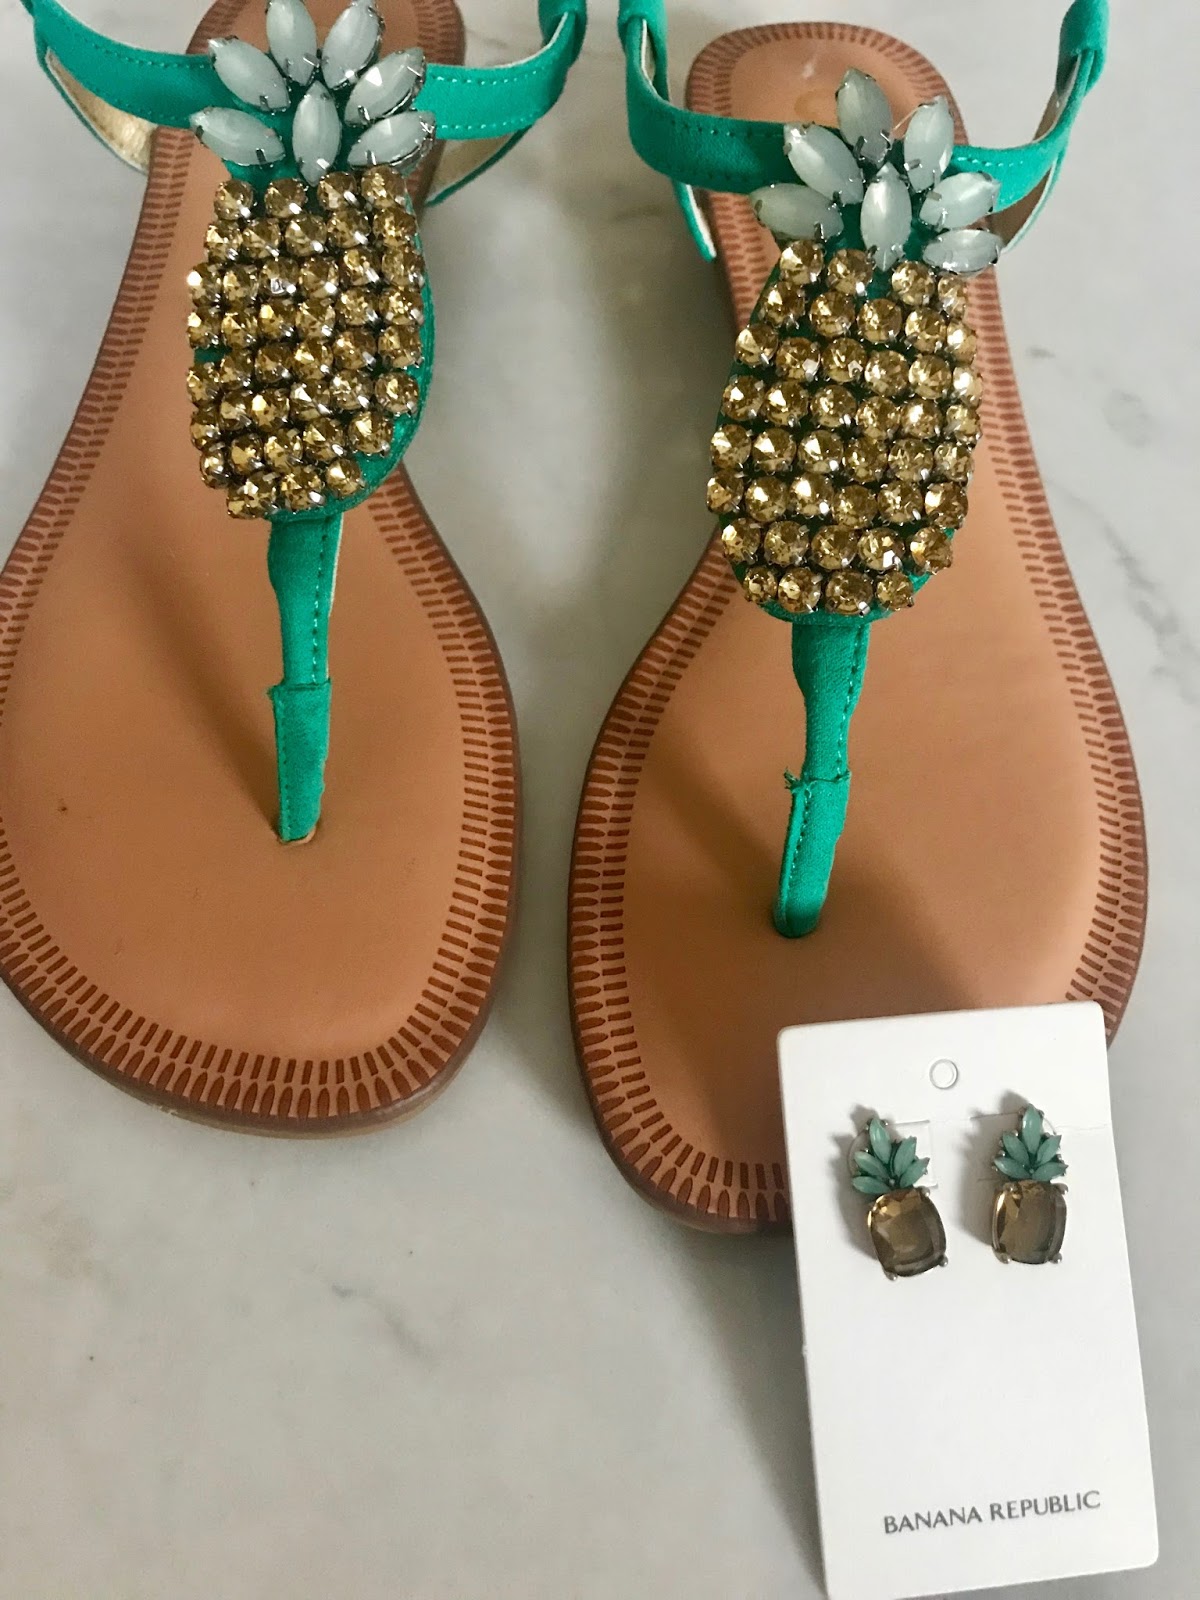 FRIDAY FAVORITES...APRIL IS ROLLING | Pineapple shoes, Cute sandals ...